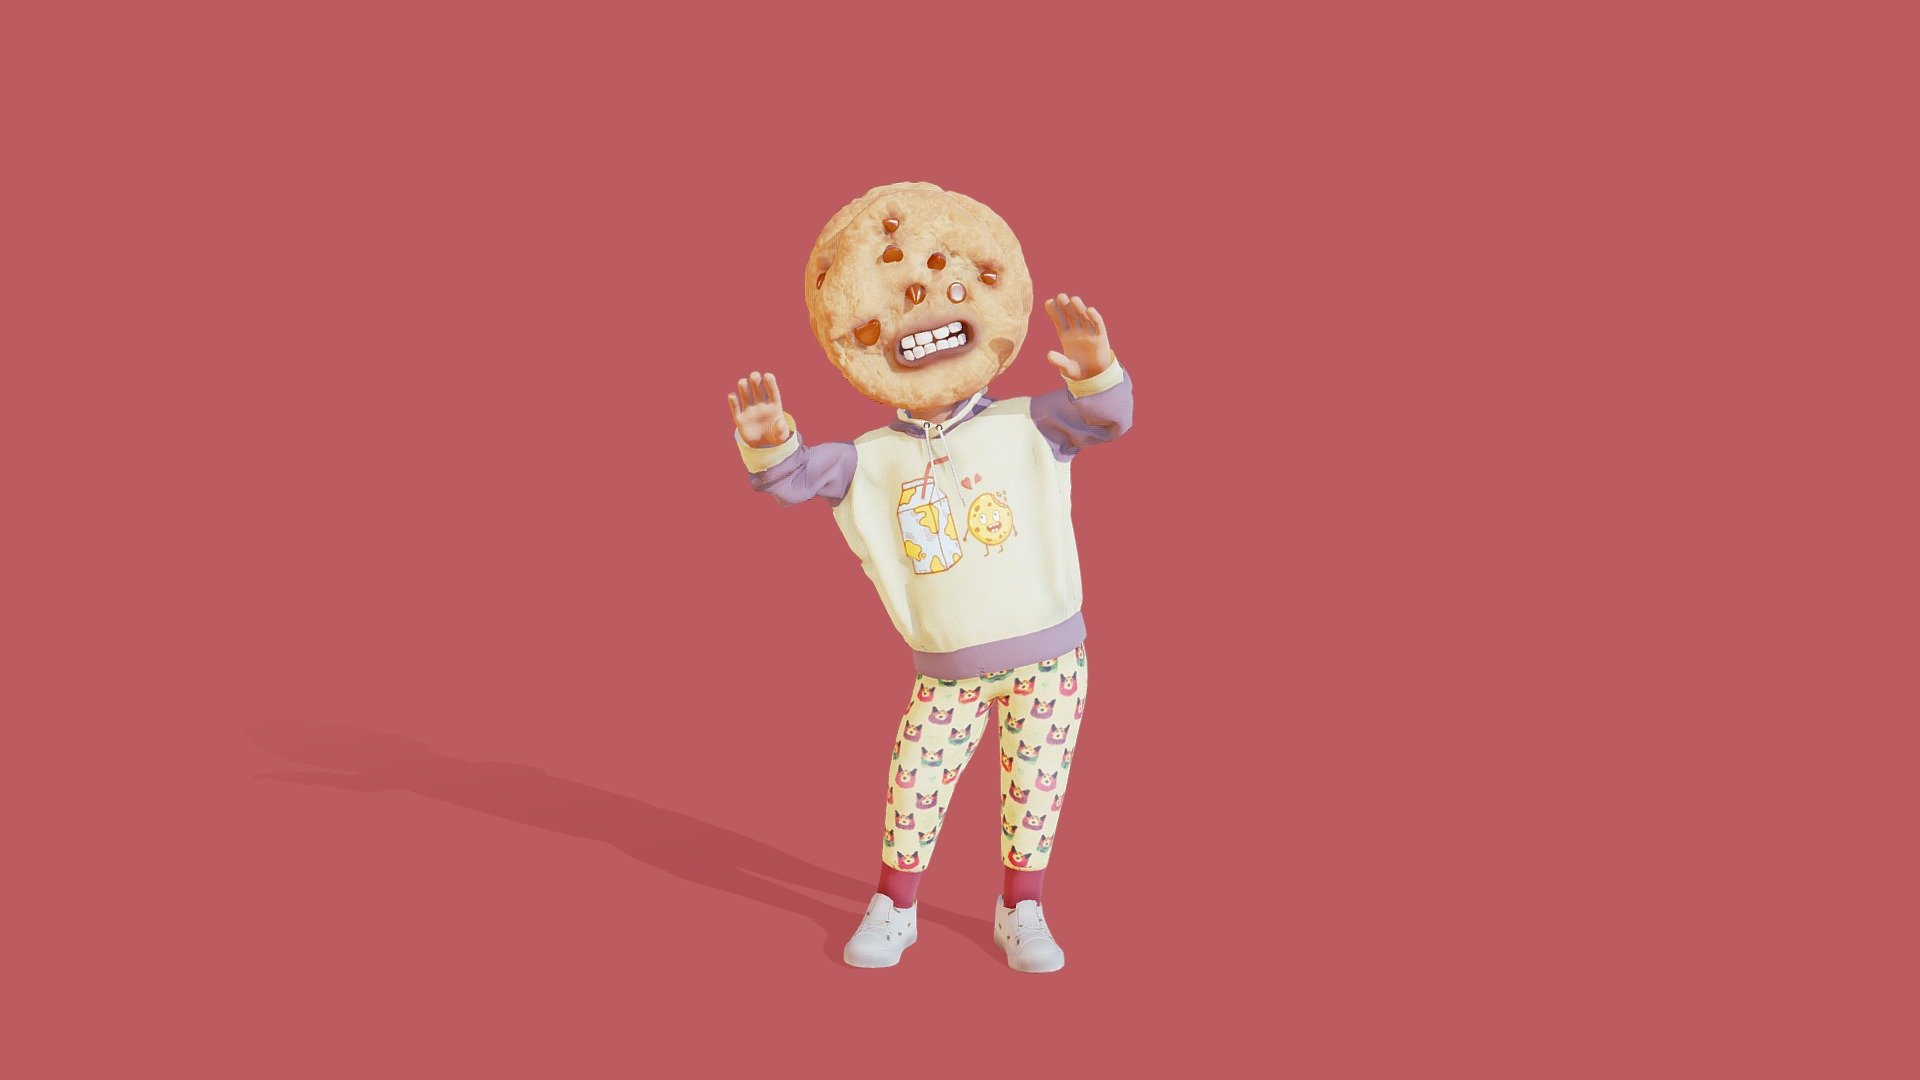 Cookie workout routine
Mixamo + Bleder rigging/skinning, animation test - Cookie - 3D model by naira001 3d model